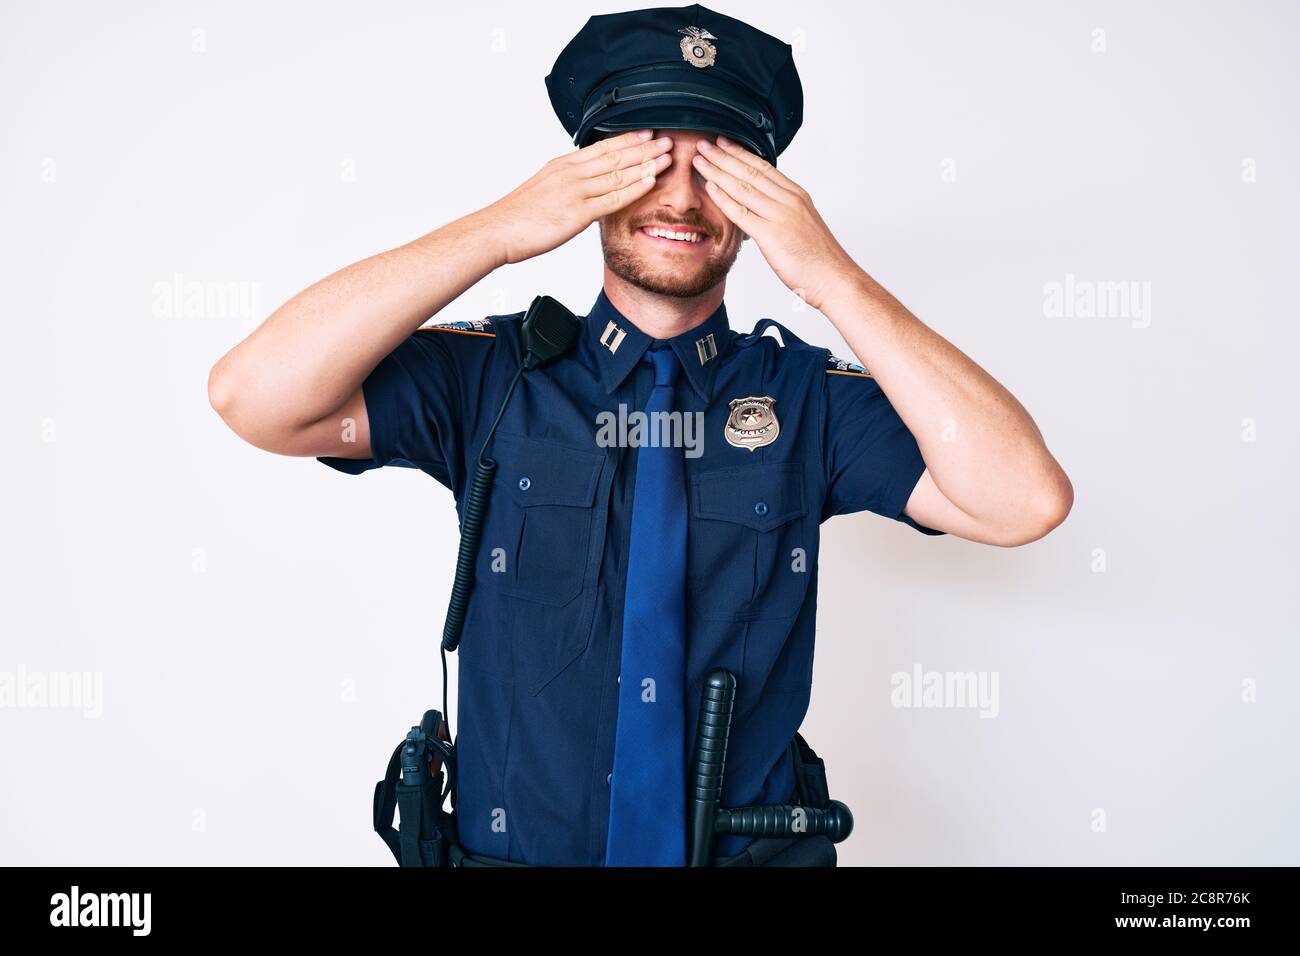 young-caucasian-man-wearing-police-uniform-covering-eyes-with-hands-smiling-cheerful-and-funny-blind-concept-2C8R76K.jpg